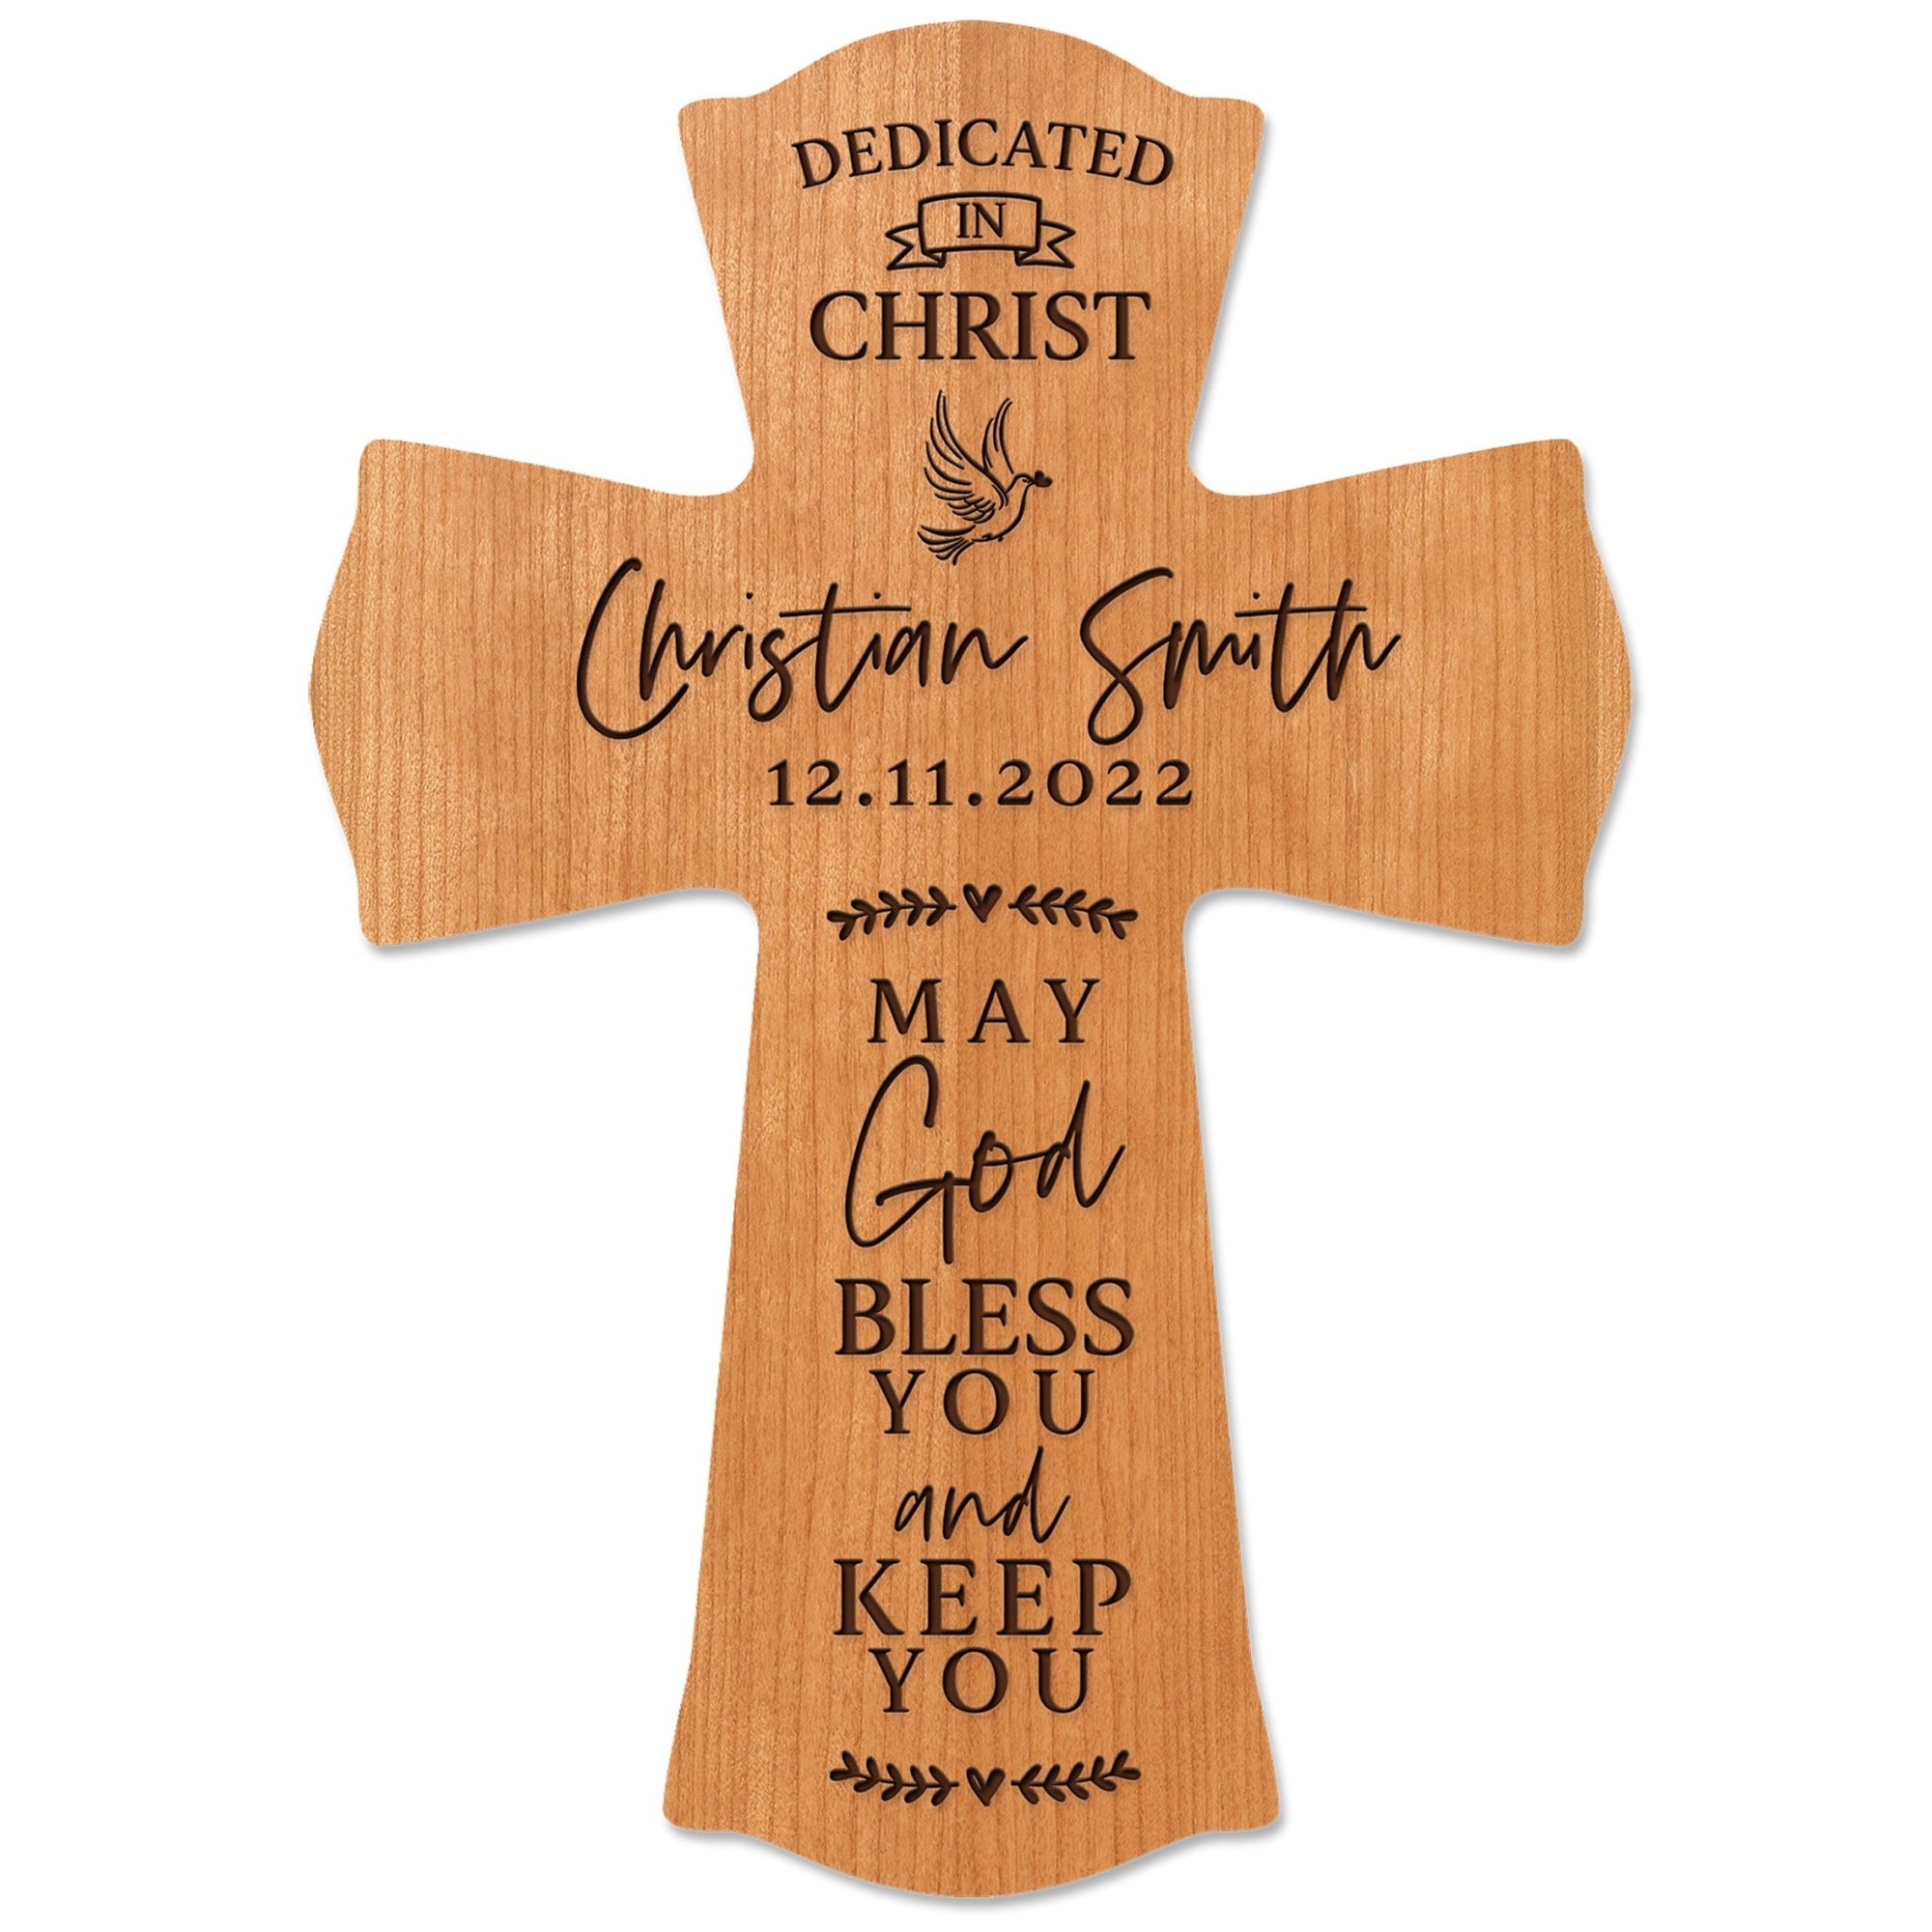 Personalized Engraved Wooden Dedication 8x11 Crosses - Dedicated In Christ - LifeSong Milestones